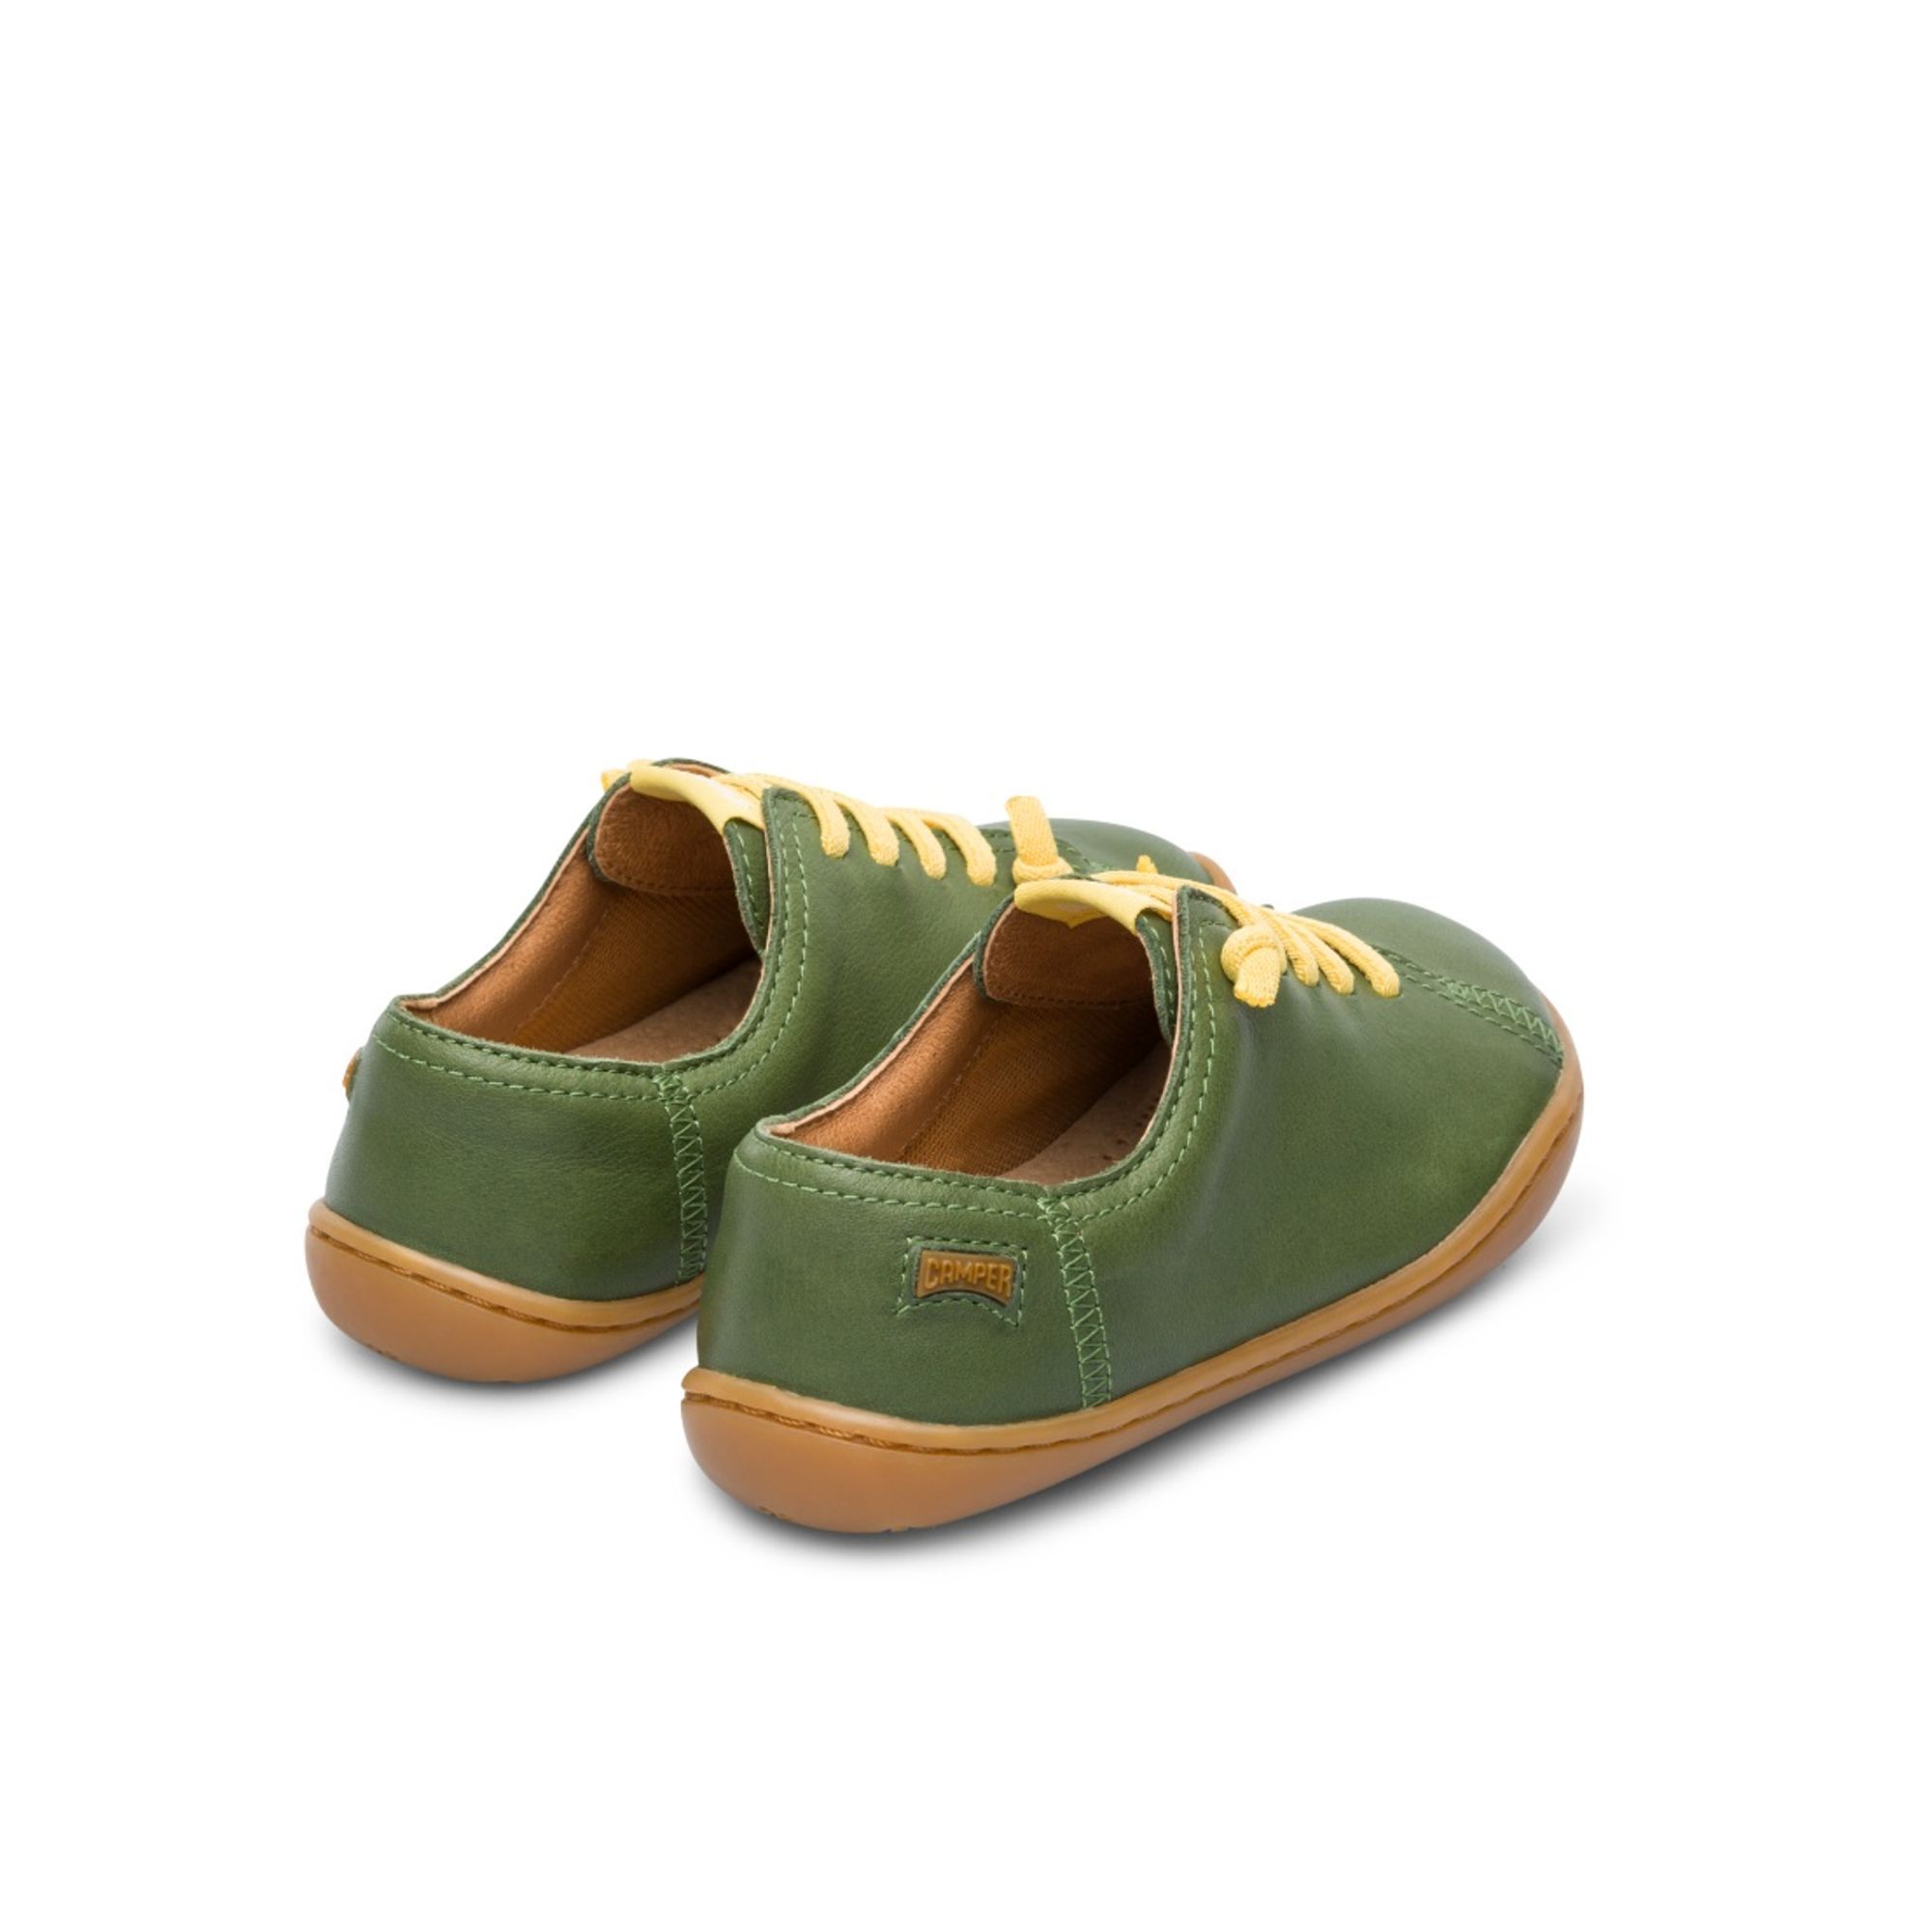 Green shoe for kids. 100% vegetal tanned leather upper with yellow elastic laces for contrast. 100% brown rubber outsole.

A Little Better, Never Perfect 

Our Peu kids' shoes follow the natural curve of small feet and feature elastic zigzag laces that won’t come undone. The 360º stitched outsole and ergonomic sole offer flexibility and protection no matter what they get into.